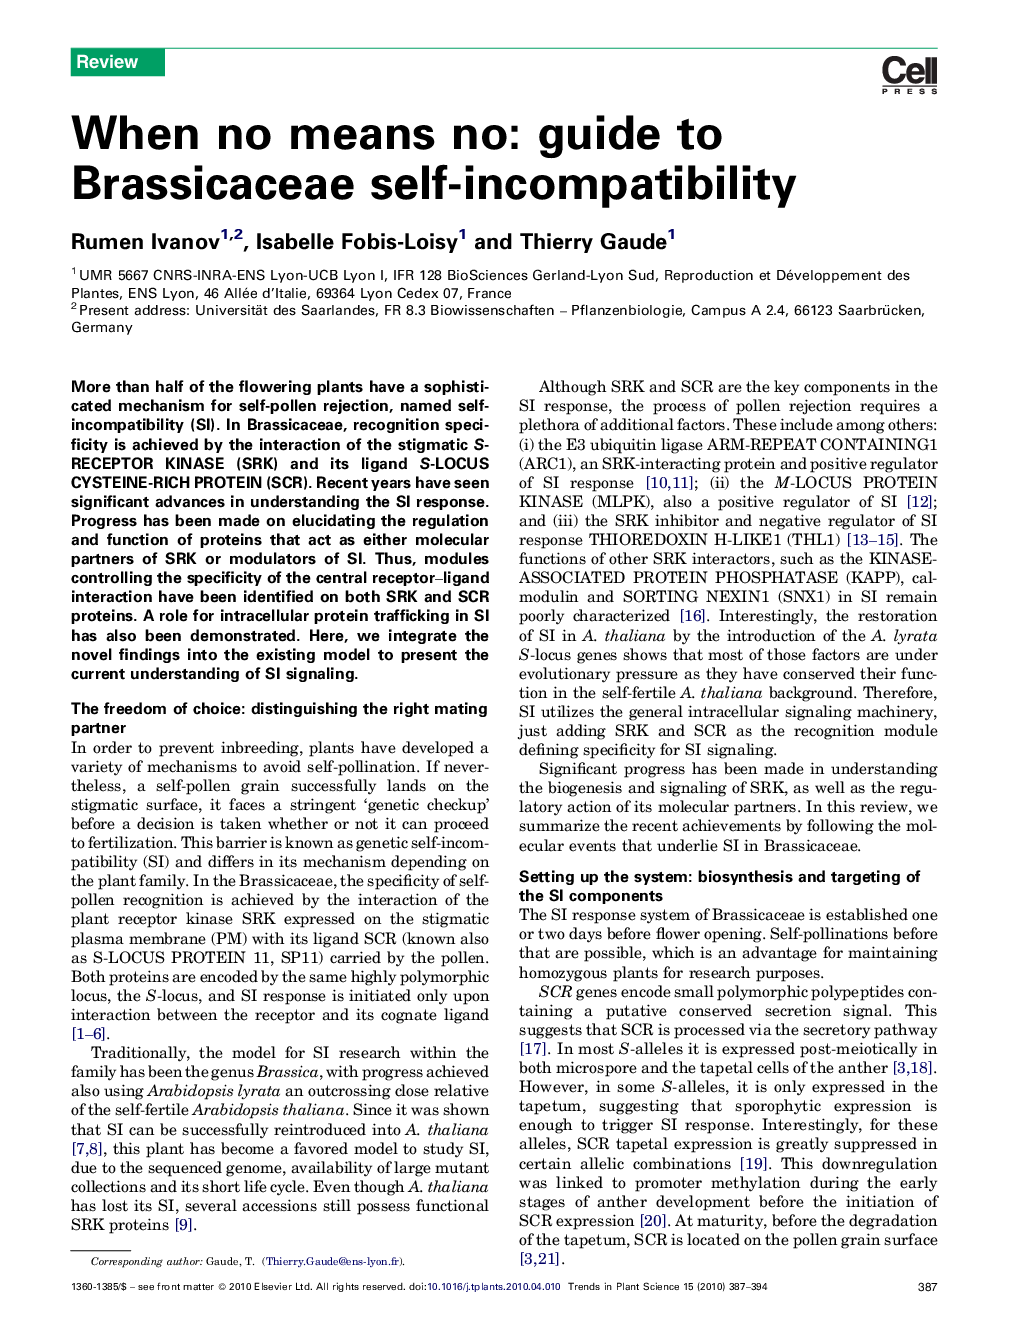 When no means no: guide to Brassicaceae self-incompatibility